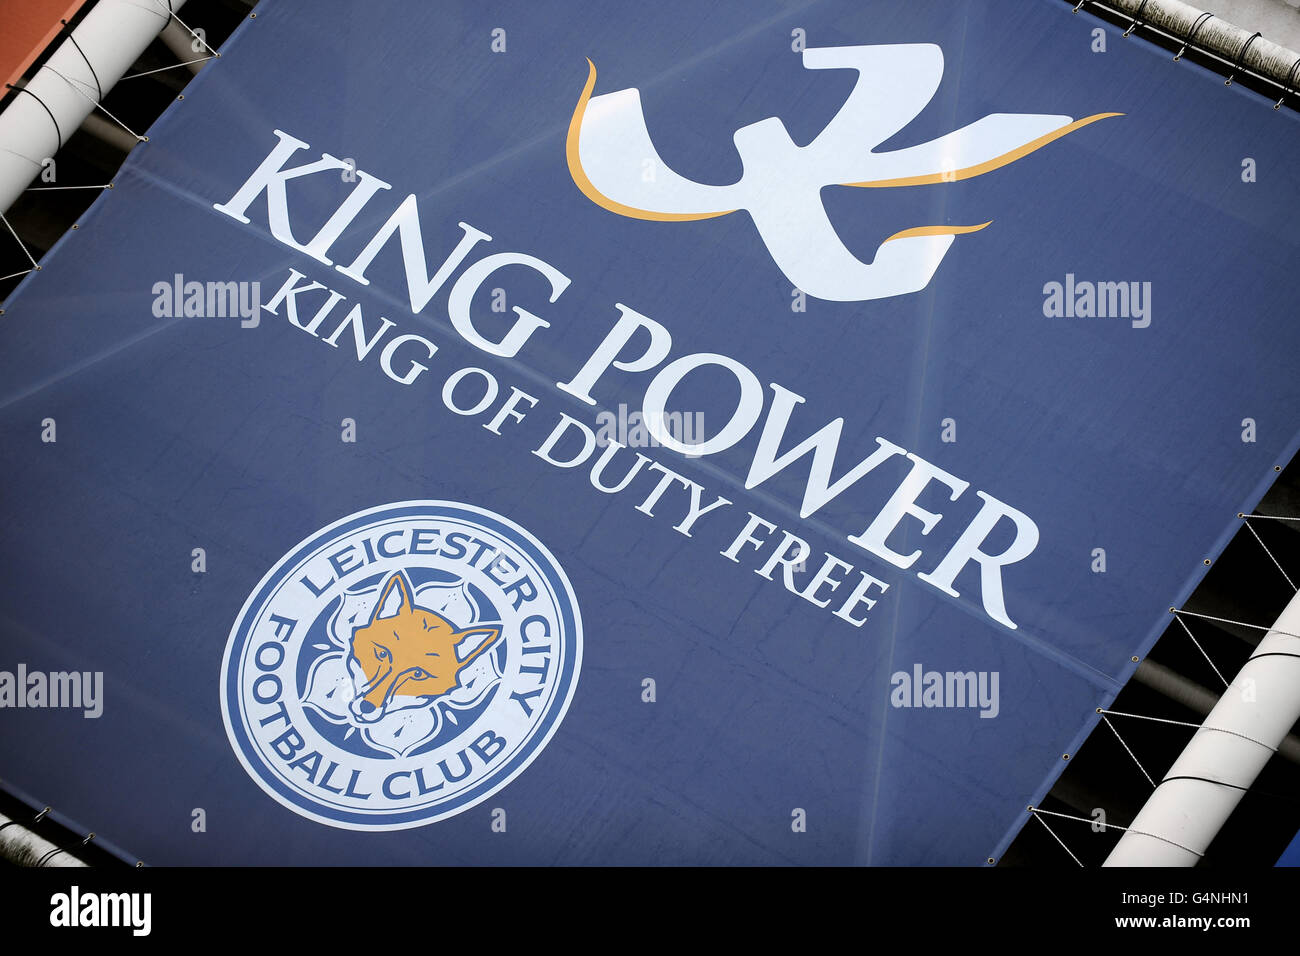 Soccer - npower Football League Championship - Leicester City v Crystal Palace - Le King Power Stadium Banque D'Images